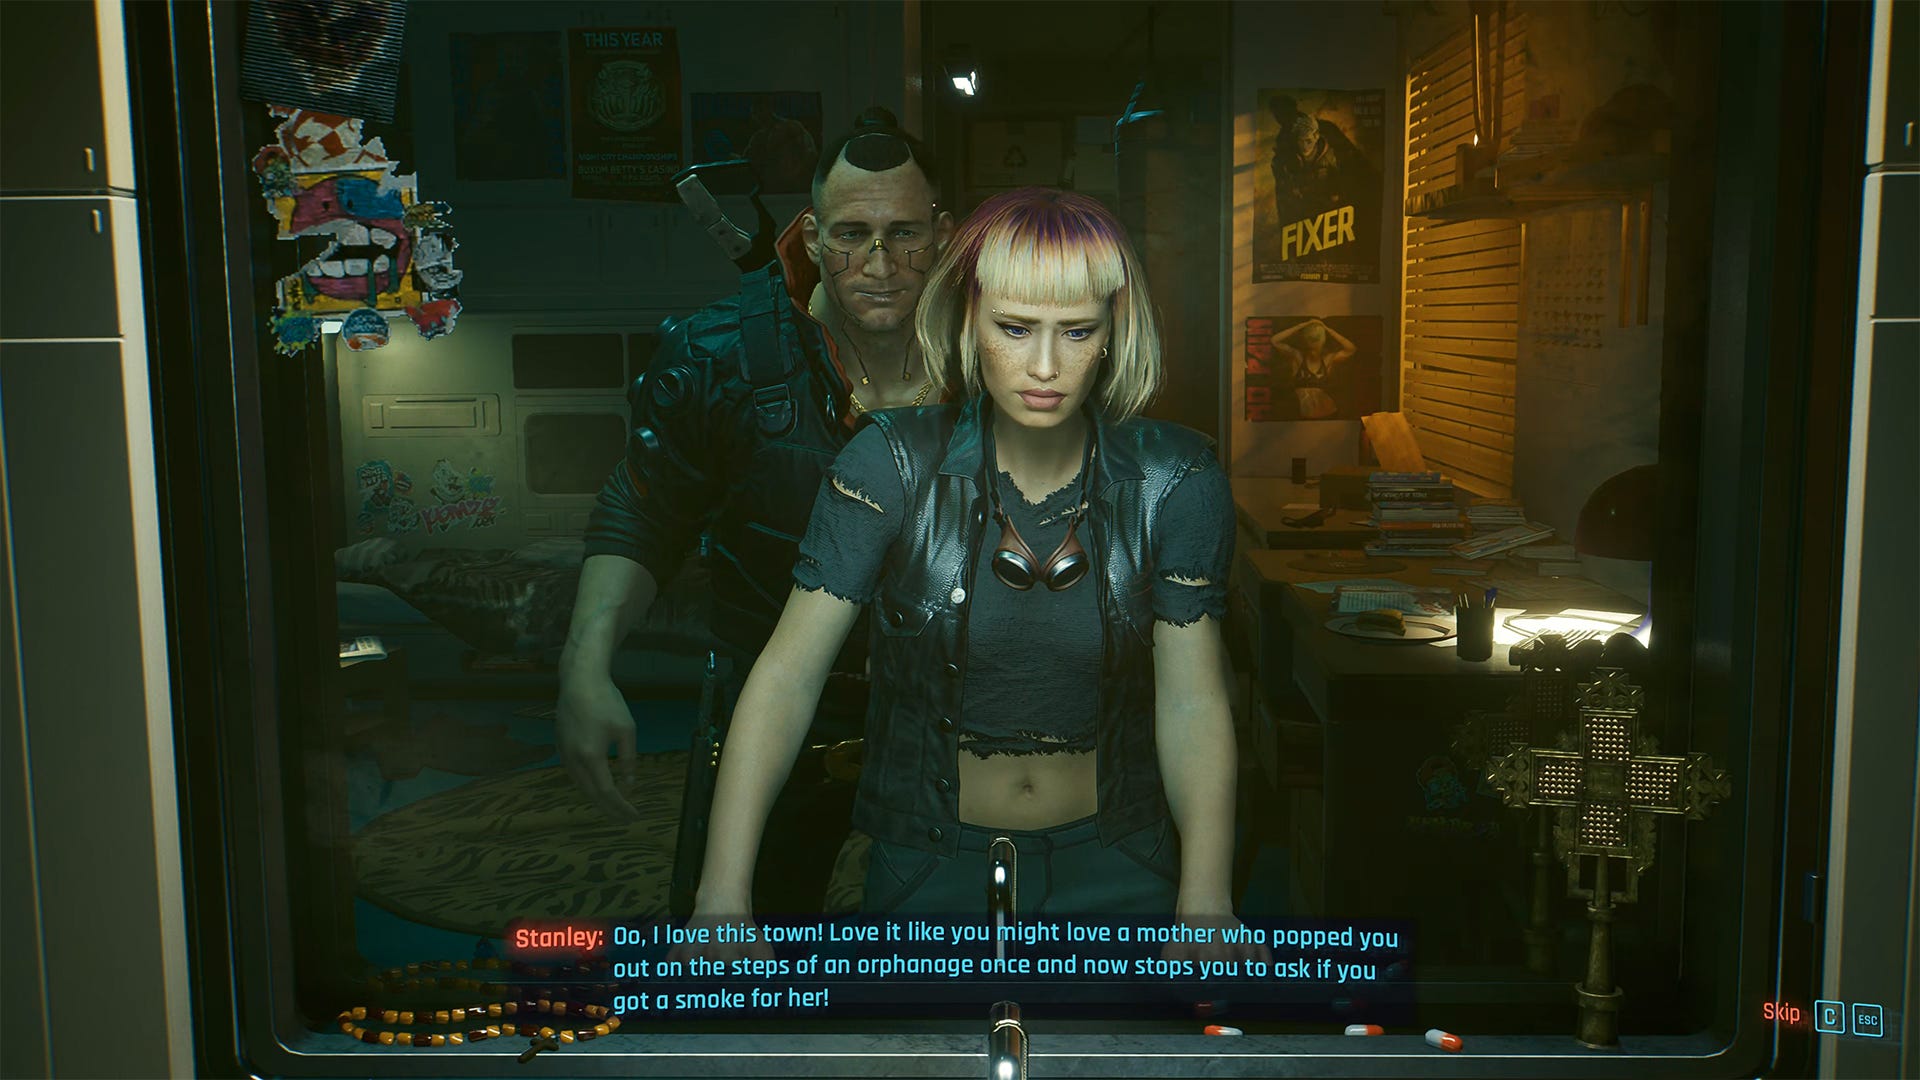 image of two virtual people in "Cyberpunk 2077" using the NVIDIA GeForce Now Ultimate cloud gaming service.